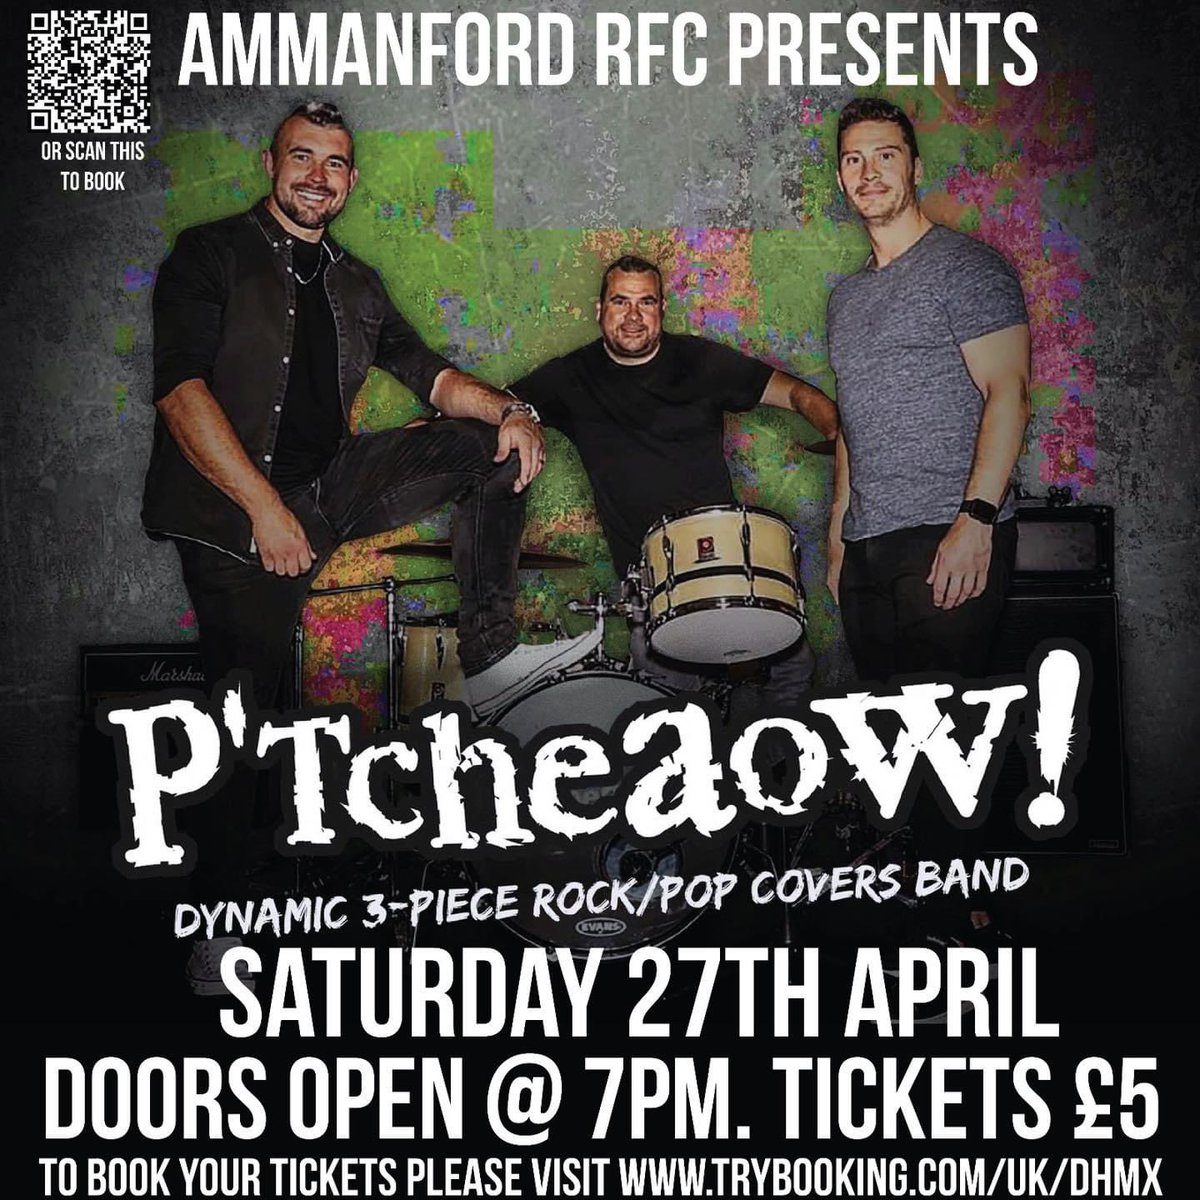 Live music at the club on Saturday April 27th, with local band P’tcheaow! @ptcheaow Limited amount of Tickets available to purchase on the link below. 🥁 🎸 @bigfilljewell 💪🏻⚫️🔵 #glasadu #mwynaclwb trybooking.com/uk/DHMX